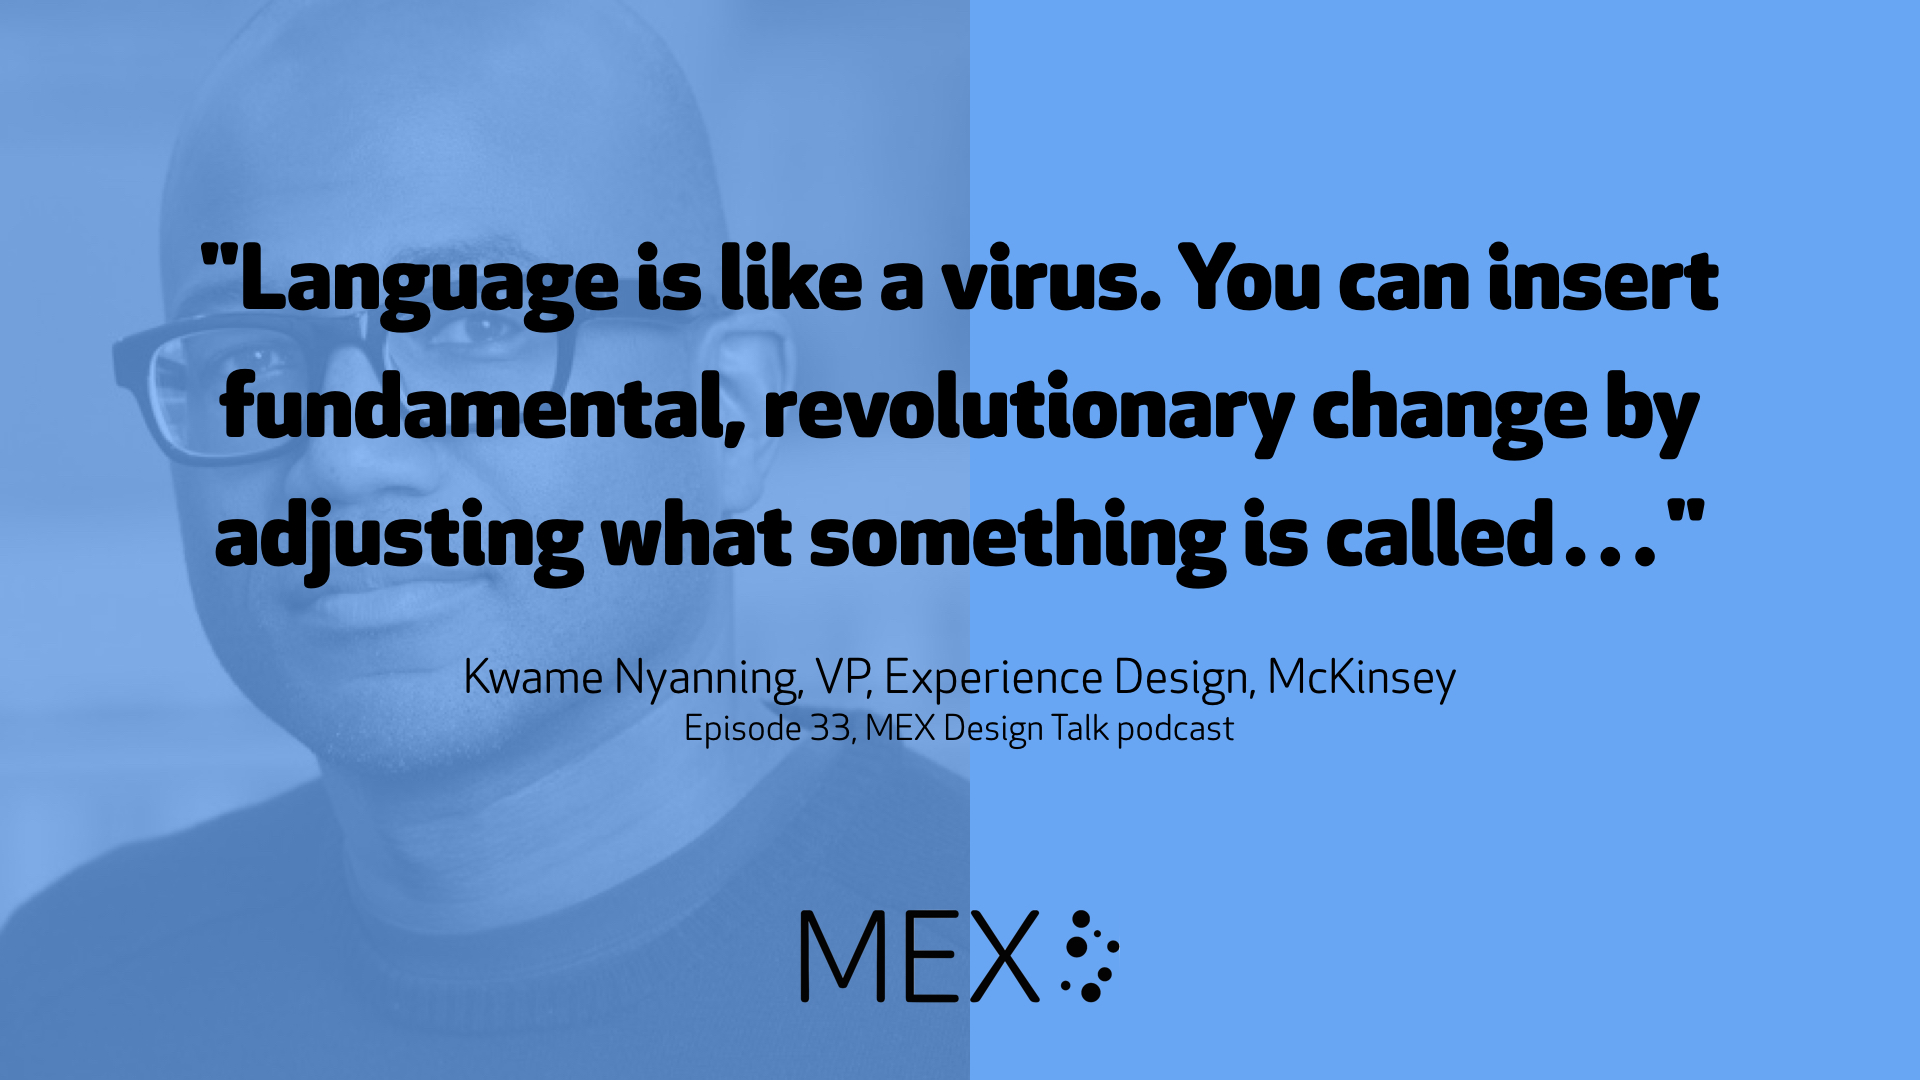 "Language is like a virus. You can insert fundamental, revolutionary change by adjusting what something is called…"  Kwame Nyanning, VP, Experience Design, McKinsey Episode 33, MEX Design Talk podcast